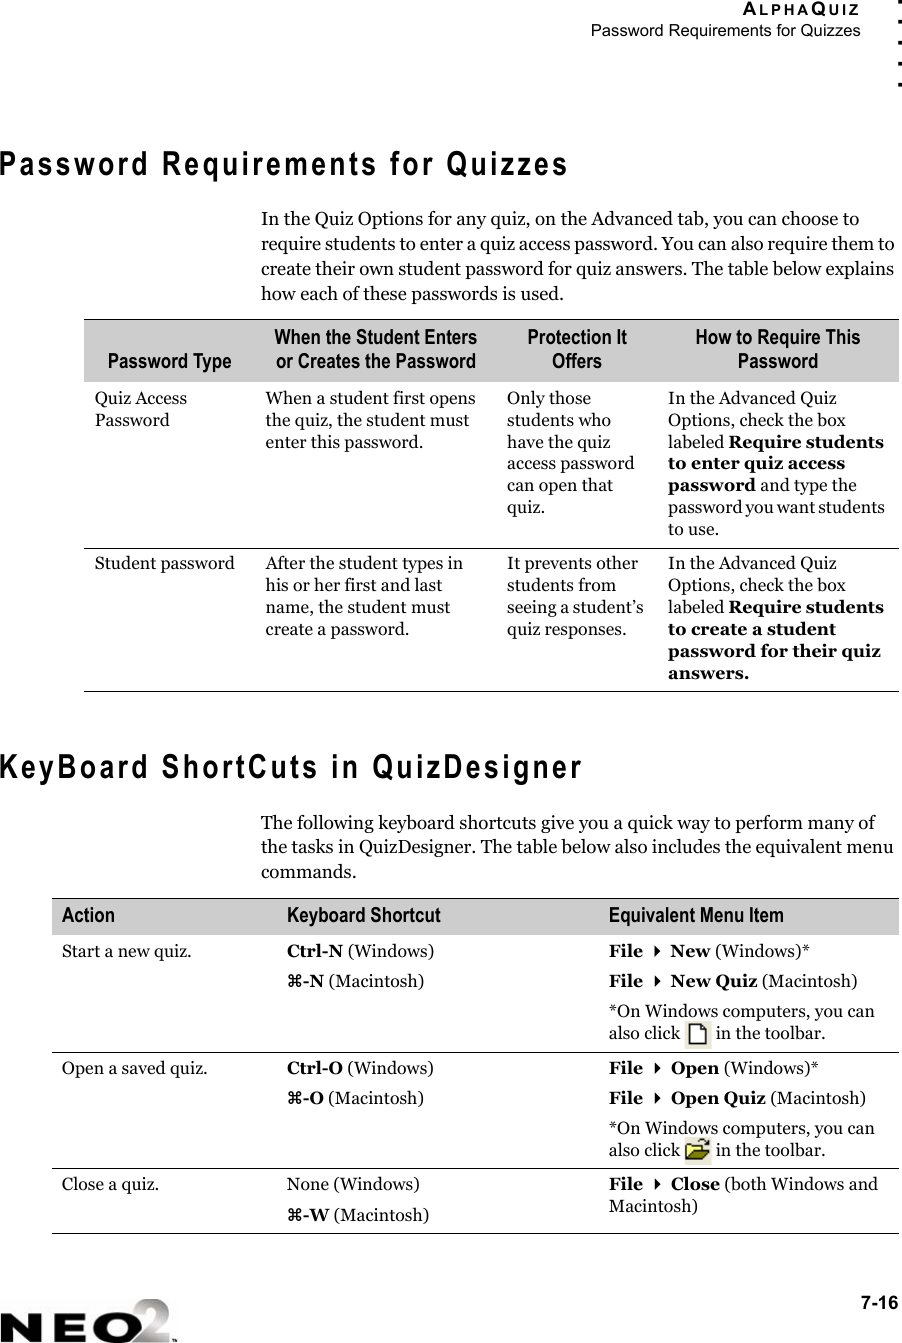 ALPHAQUIZPassword Requirements for Quizzes7-16. . . . .Password Requirements for QuizzesIn the Quiz Options for any quiz, on the Advanced tab, you can choose to require students to enter a quiz access password. You can also require them to create their own student password for quiz answers. The table below explains how each of these passwords is used.KeyBoard ShortCuts in QuizDesignerThe following keyboard shortcuts give you a quick way to perform many of the tasks in QuizDesigner. The table below also includes the equivalent menu commands.Password TypeWhen the Student Enters or Creates the PasswordProtection It OffersHow to Require This PasswordQuiz Access PasswordWhen a student first opens the quiz, the student must enter this password.Only those students who have the quiz access password can open that quiz.In the Advanced Quiz Options, check the box labeled Require students to enter quiz access password and type the password you want students to use.Student password After the student types in his or her first and last name, the student must create a password.It prevents other students from seeing a student’s quiz responses.In the Advanced Quiz Options, check the box labeled Require students to create a student password for their quiz answers.Action Keyboard Shortcut Equivalent Menu ItemStart a new quiz. Ctrl-N (Windows)z-N (Macintosh)File  New (Windows)*File  New Quiz (Macintosh)*On Windows computers, you can also click   in the toolbar.Open a saved quiz. Ctrl-O (Windows)z-O (Macintosh)File  Open (Windows)*File  Open Quiz (Macintosh)*On Windows computers, you can also click   in the toolbar.Close a quiz. None (Windows)z-W (Macintosh)File  Close (both Windows and Macintosh)